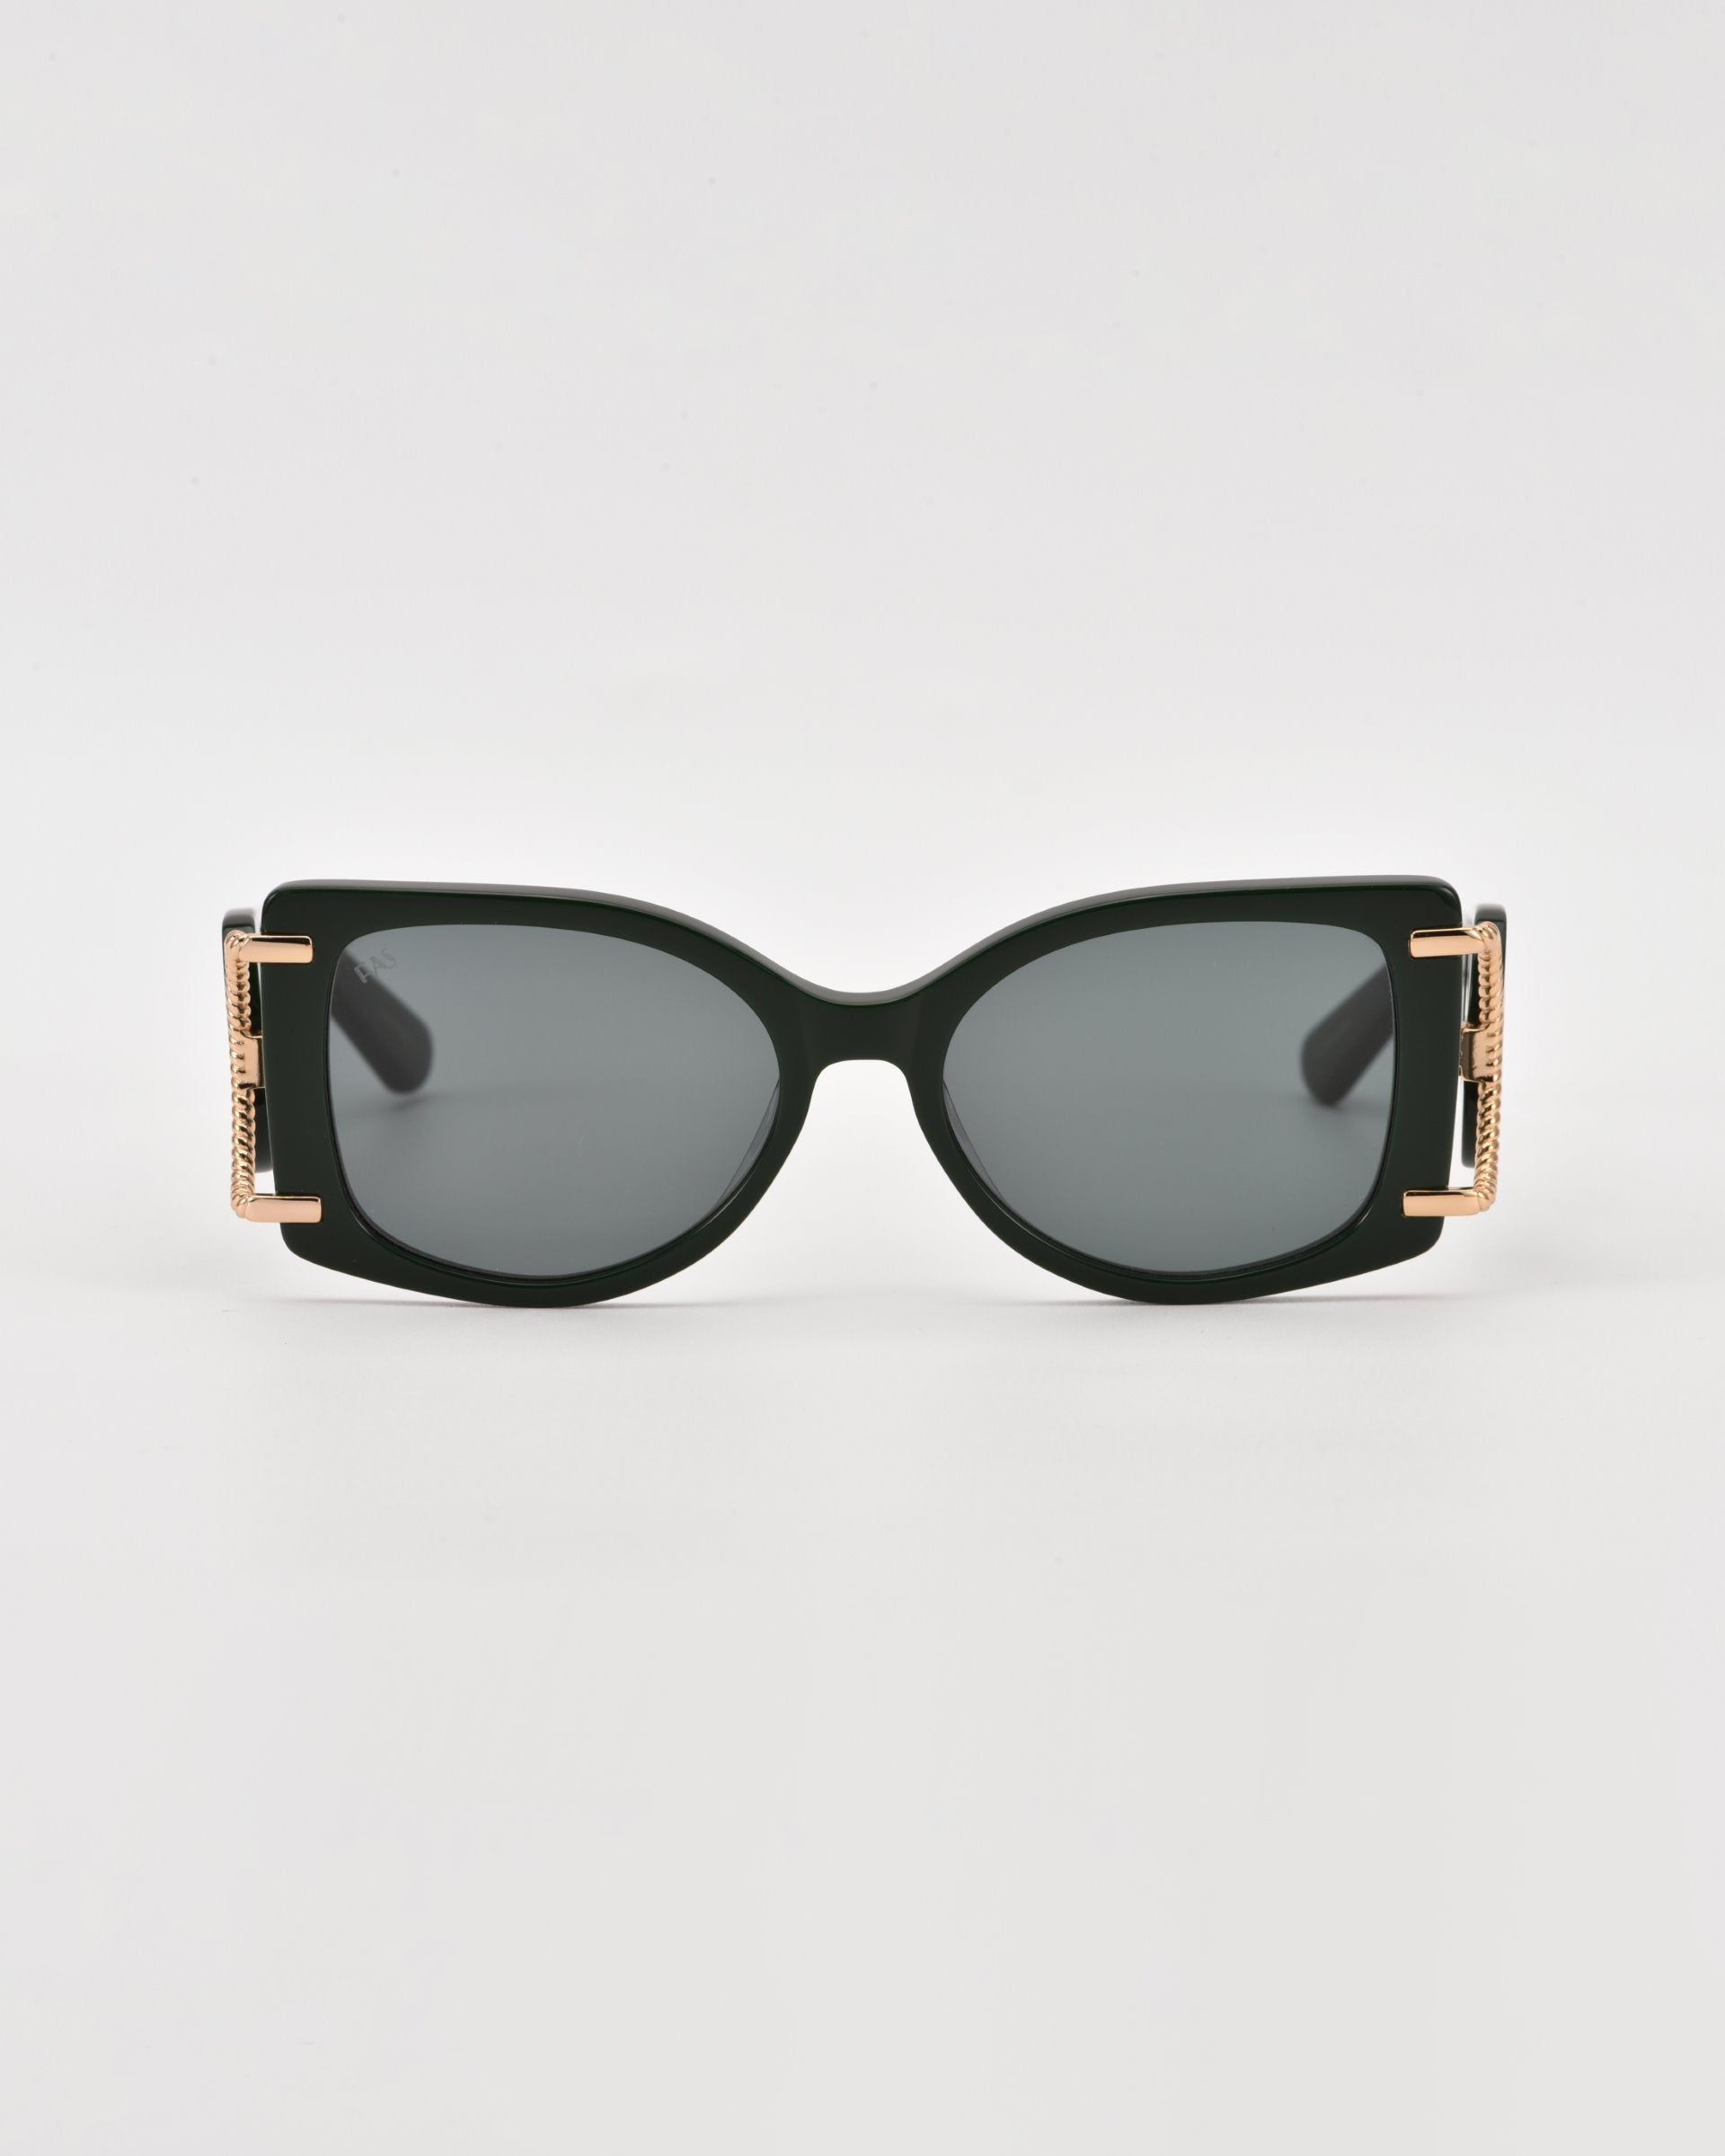 A pair of For Art's Sake® Sculpture black rectangular acetate sunglasses with dark lenses. The arms of the sunglasses feature 18-karat gold-plated accents near the hinges, adding a touch of elegance. These For Art's Sake® Sculpture sunglasses, offering 100% UVA & UVB protection, are set against a plain white background.